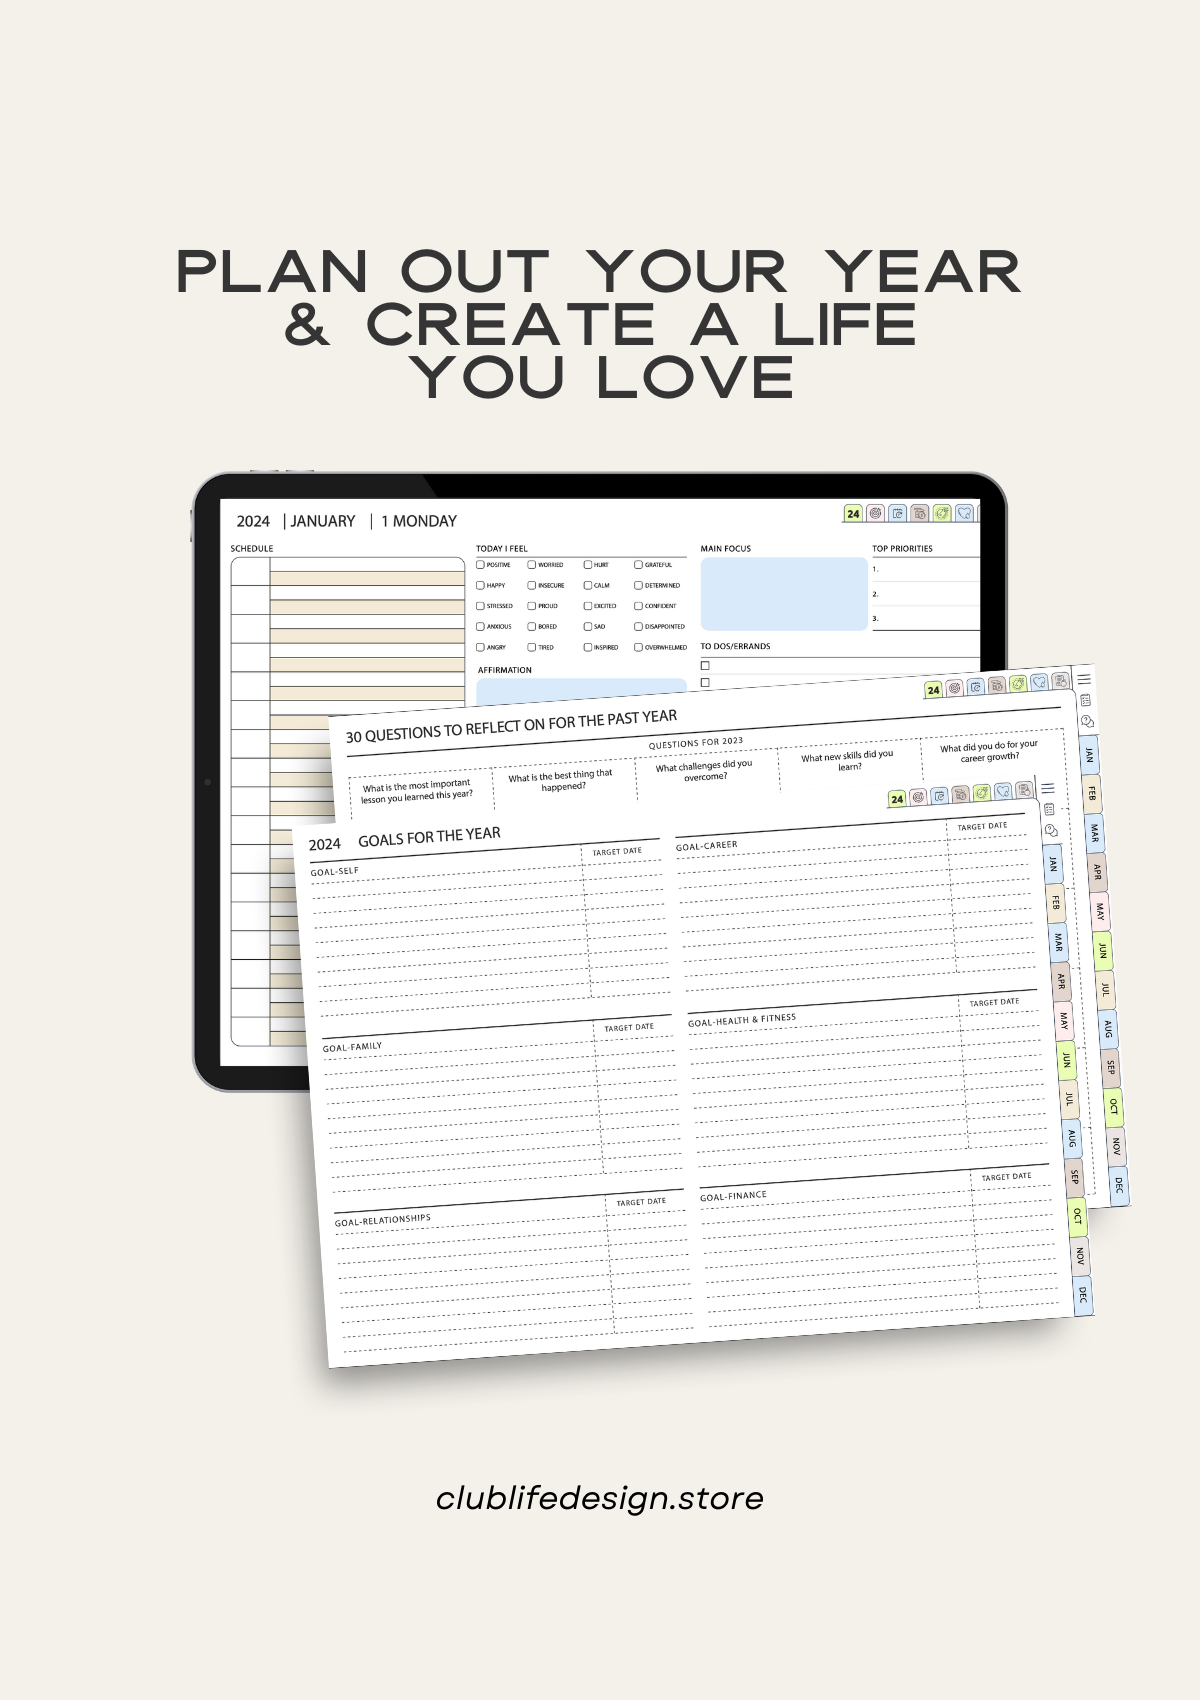 All-In-One Digital Planner 2024